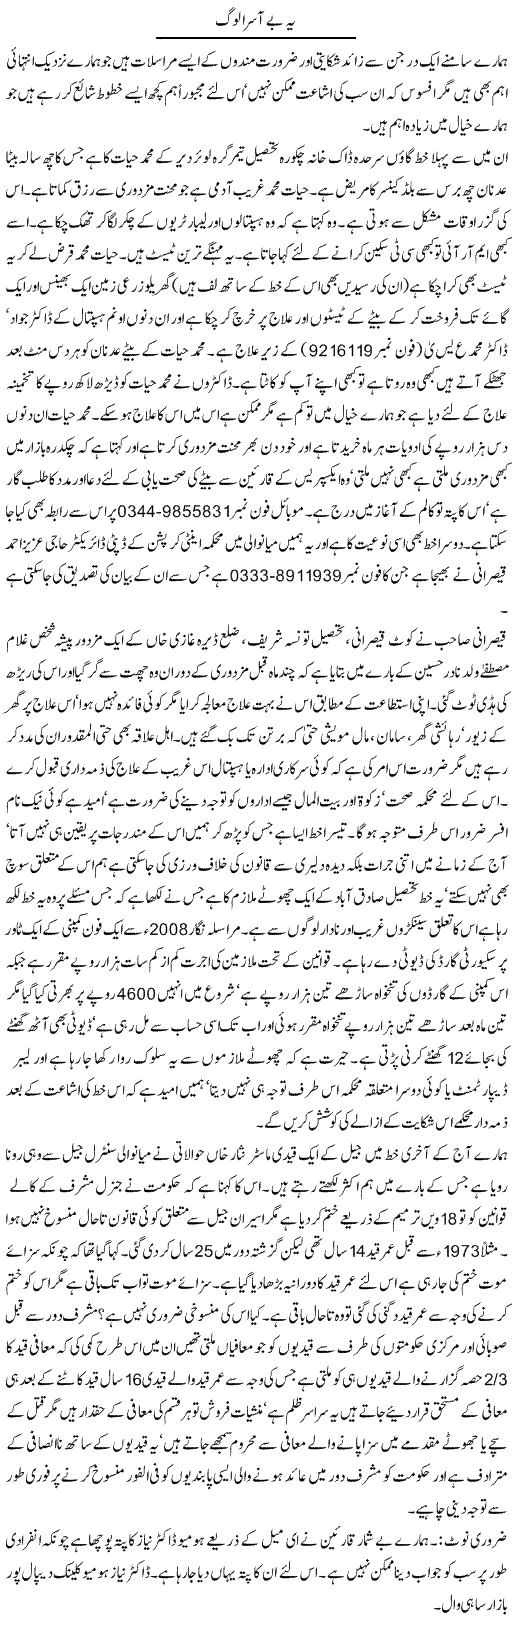 These Poor People Express Column Hameed Akhtar 24 March 2011